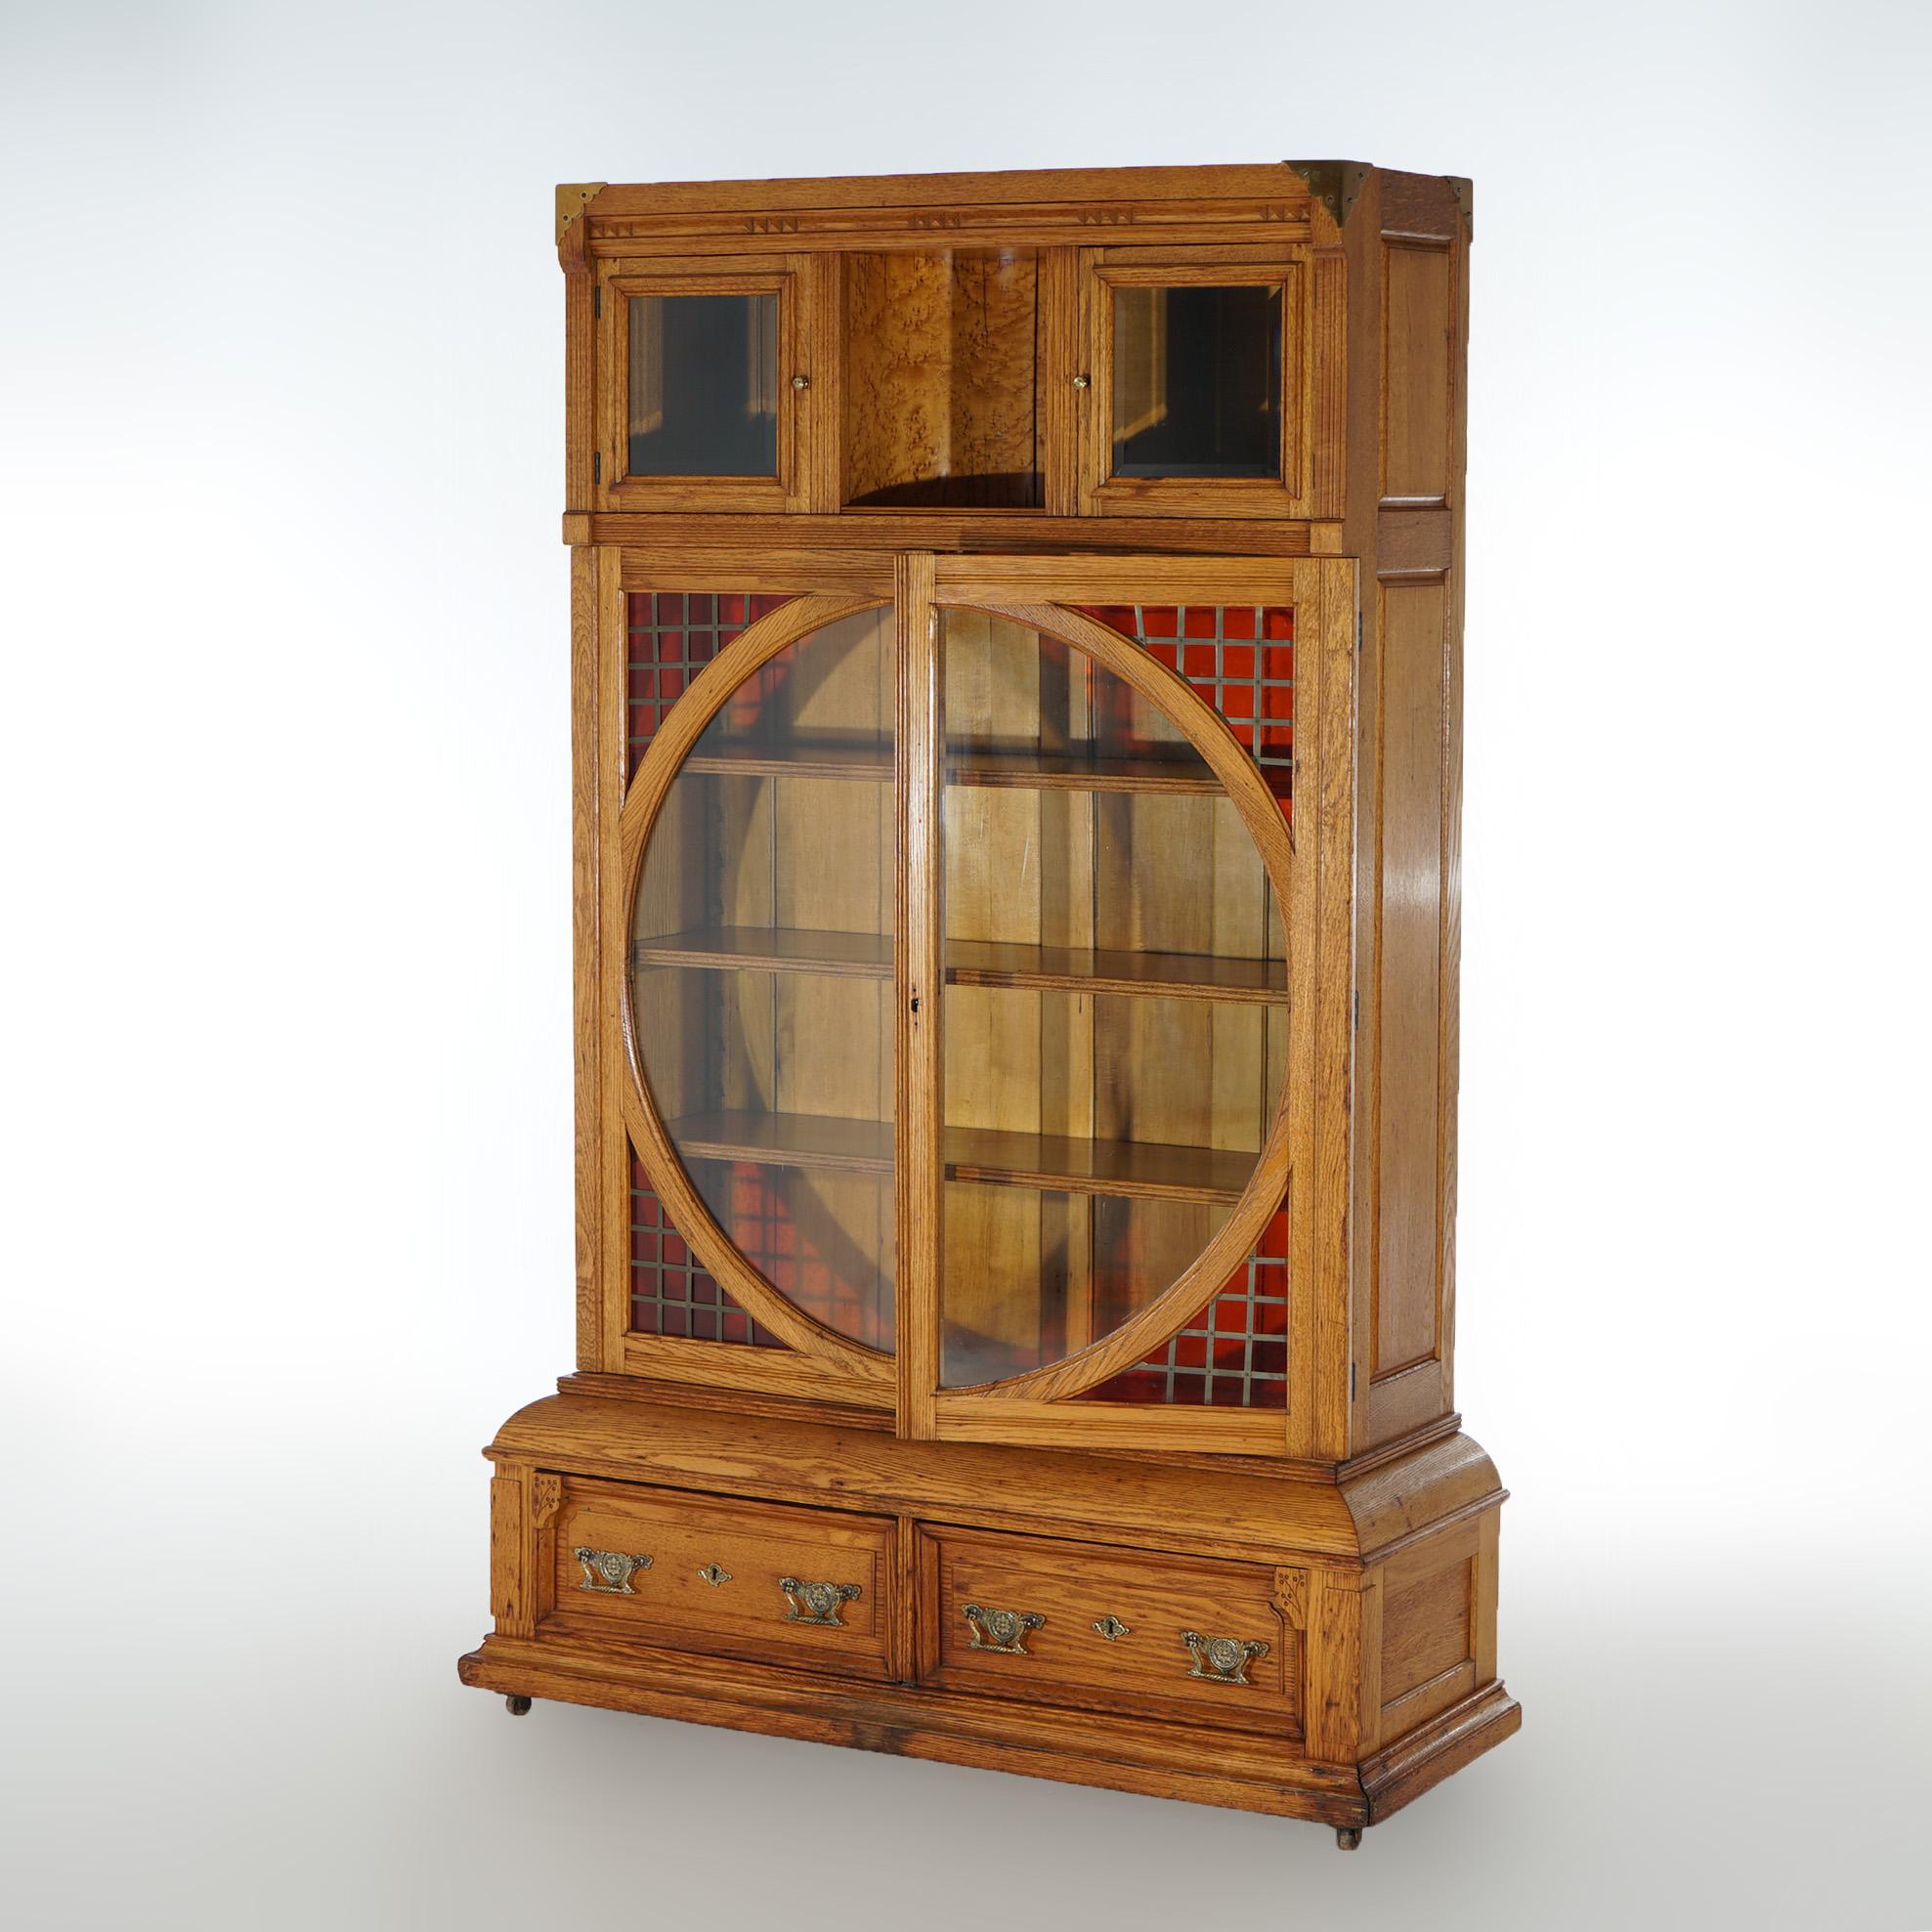 An antique Arts and Crafts bookcase offers oak paneled construction with case having upper double door cabinet over primary case with double glass doors having large central circular viewing element with leaded stained glass corbels and opening to